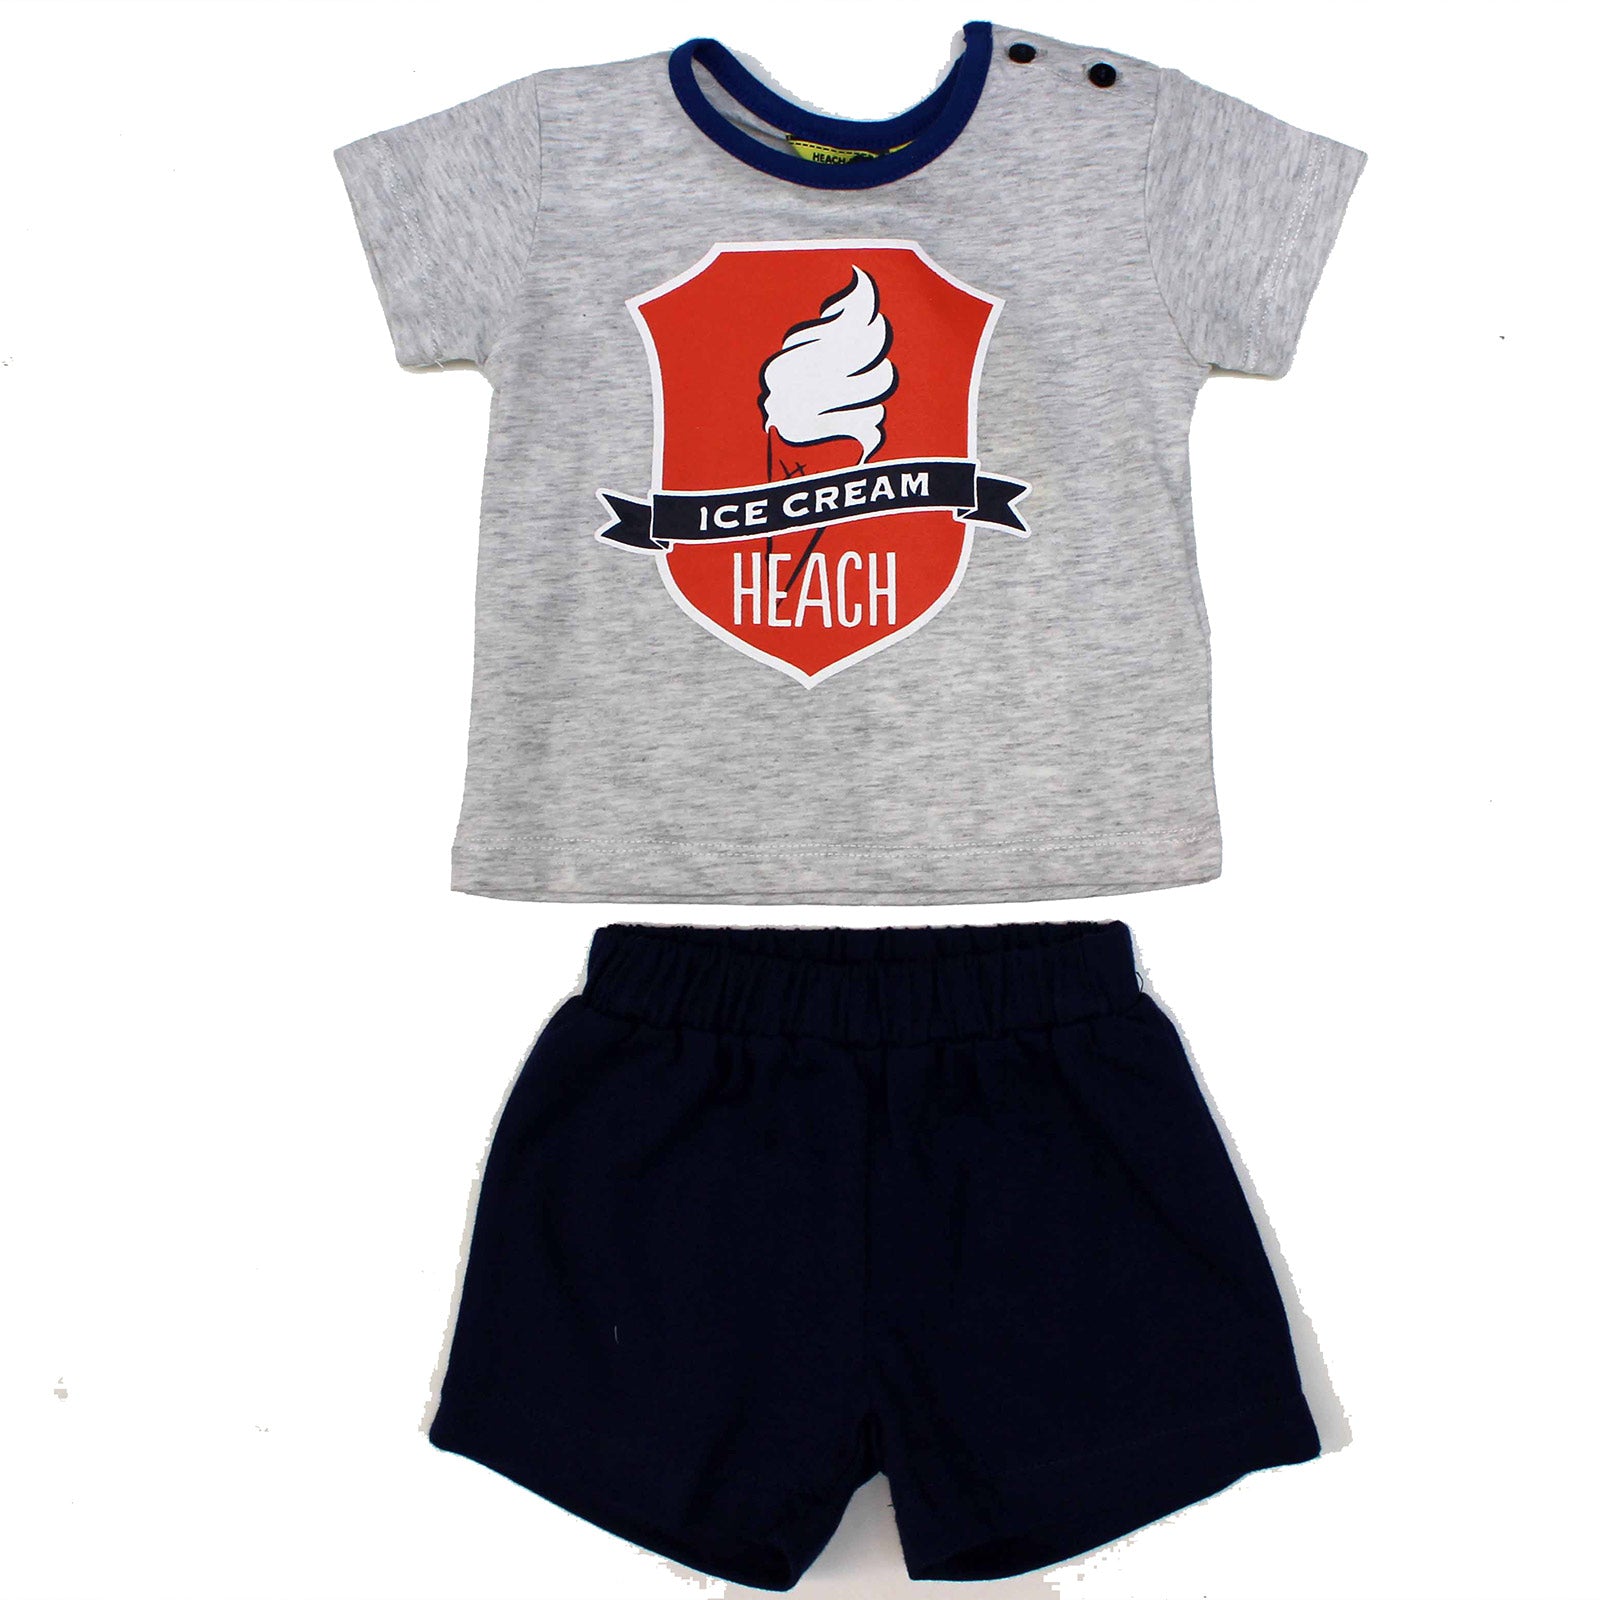 
  Two-piece suit from the Silvian Heach children's clothing line consisting of cotton jersey sho...